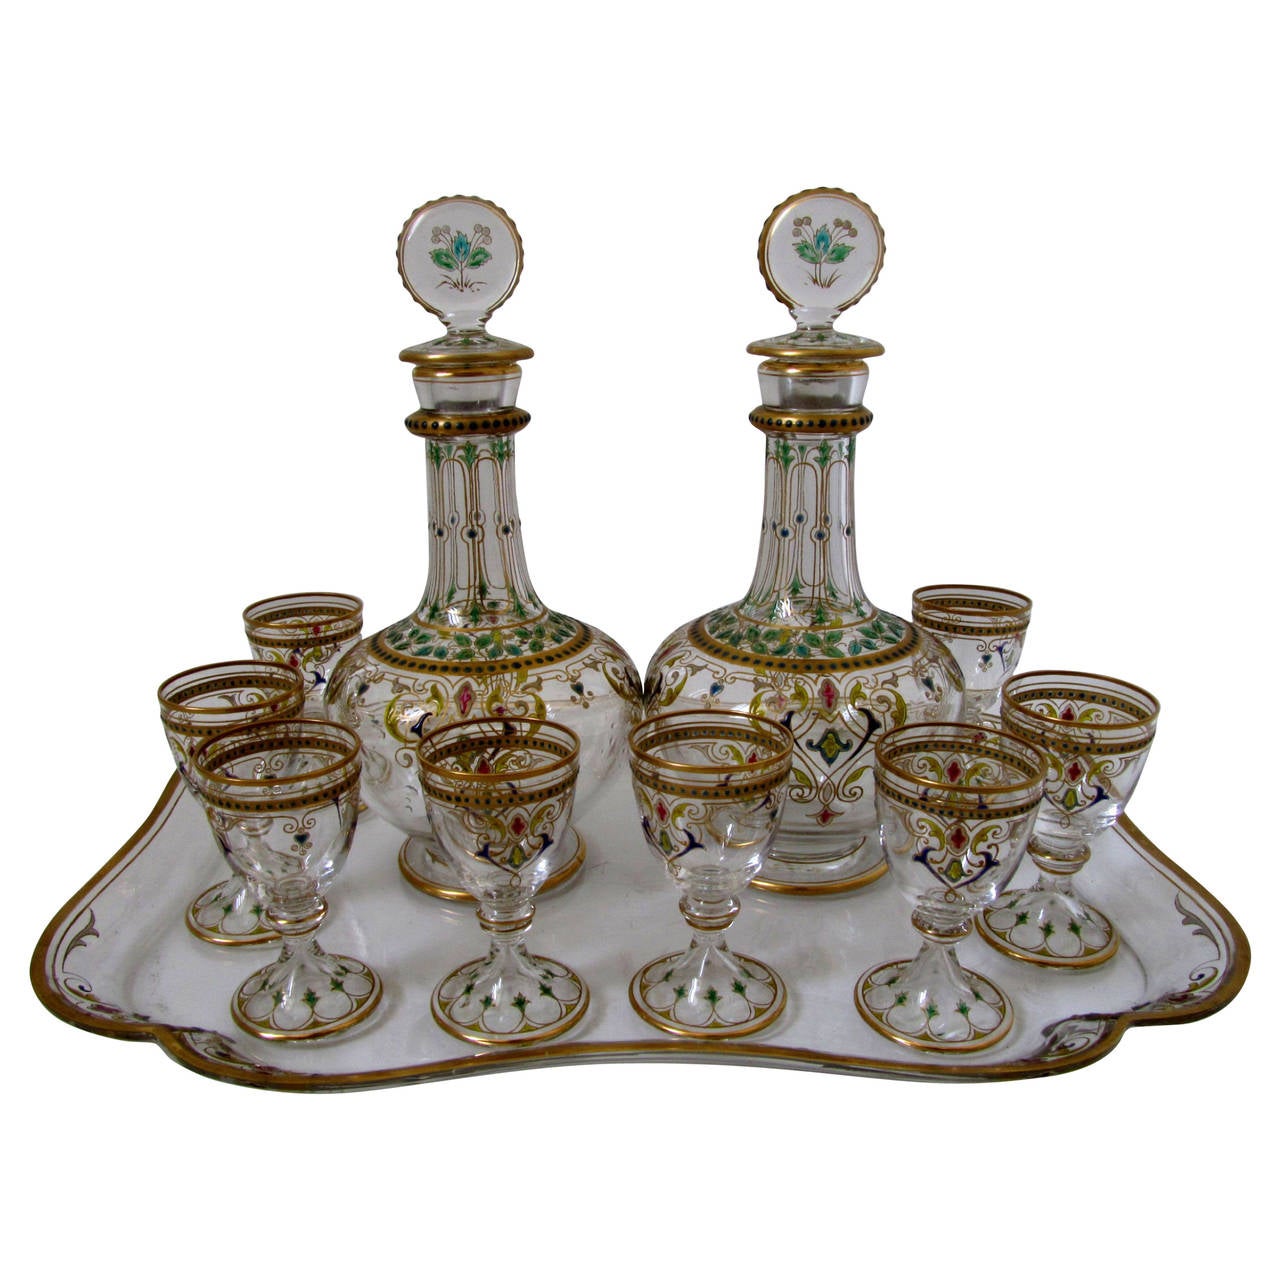 1870s Exceptional French Baccarat Enameled Crystal Liquor Service